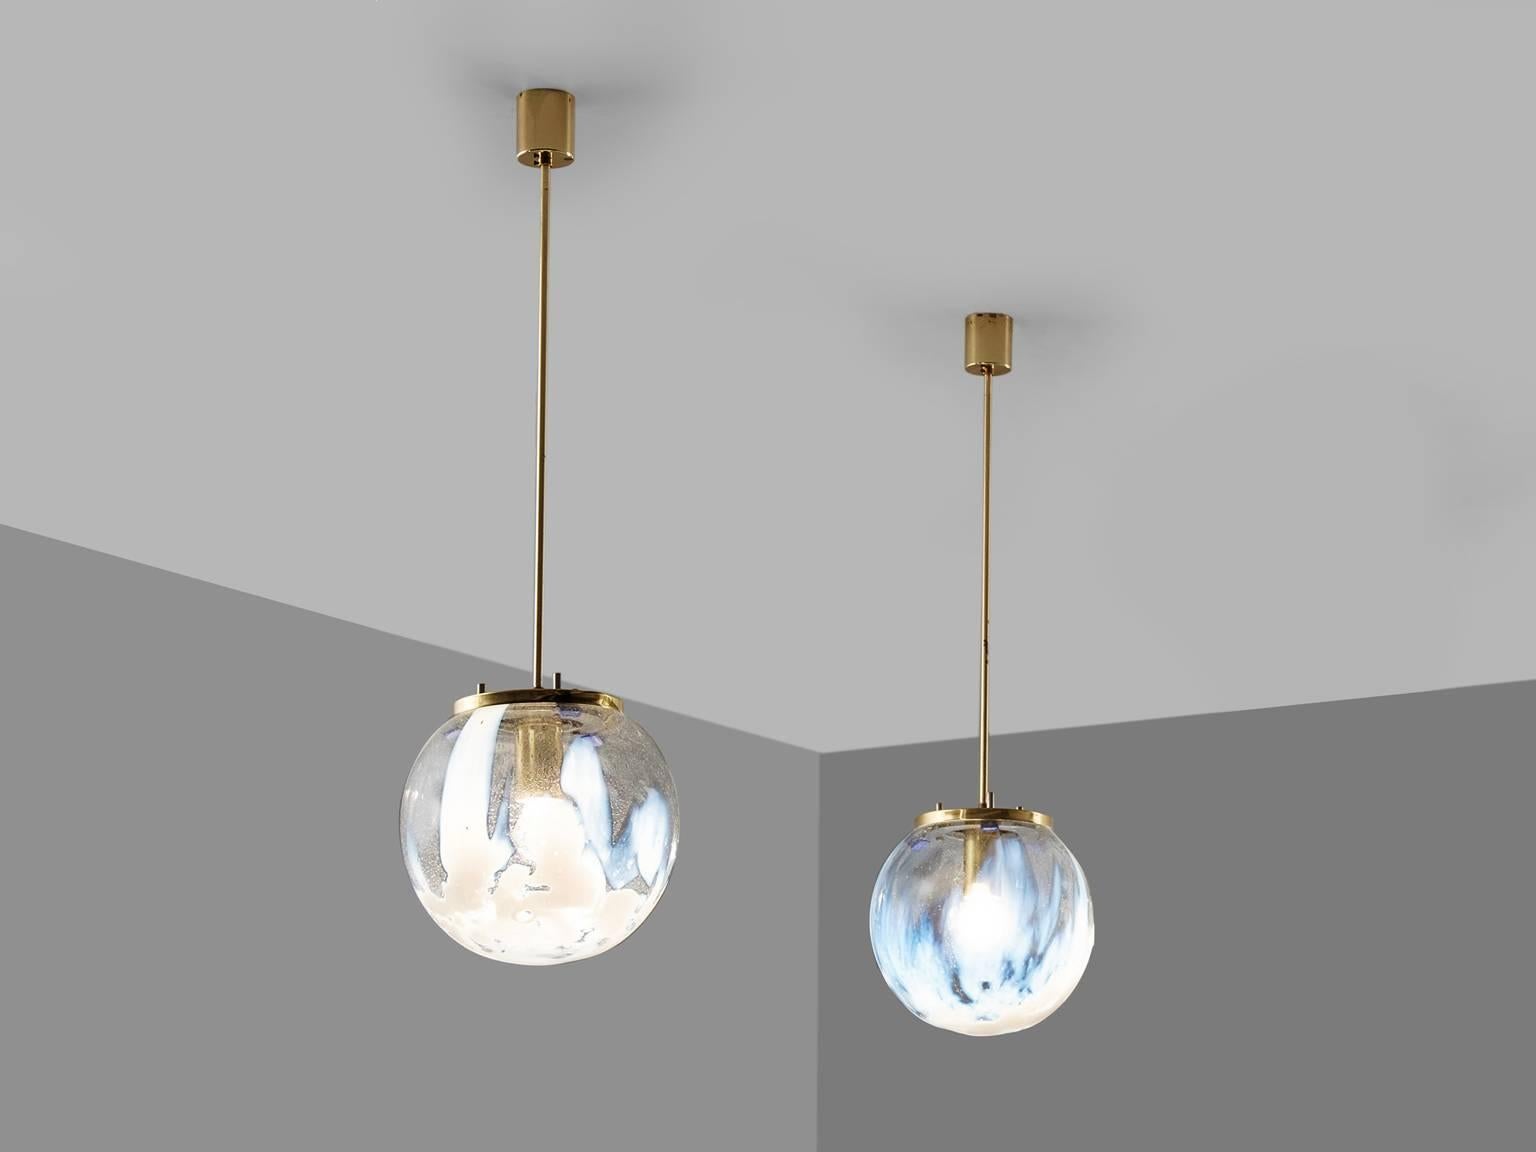 Set of 2 pendants in glass and brass, Italy, 1950s.

Wonderful ceiling lamp with art glass spheres, mounted to a brass element with a tubular rod to the ceiling. It is nicely finished with a cylindrical canopy, well made in brass as well. The